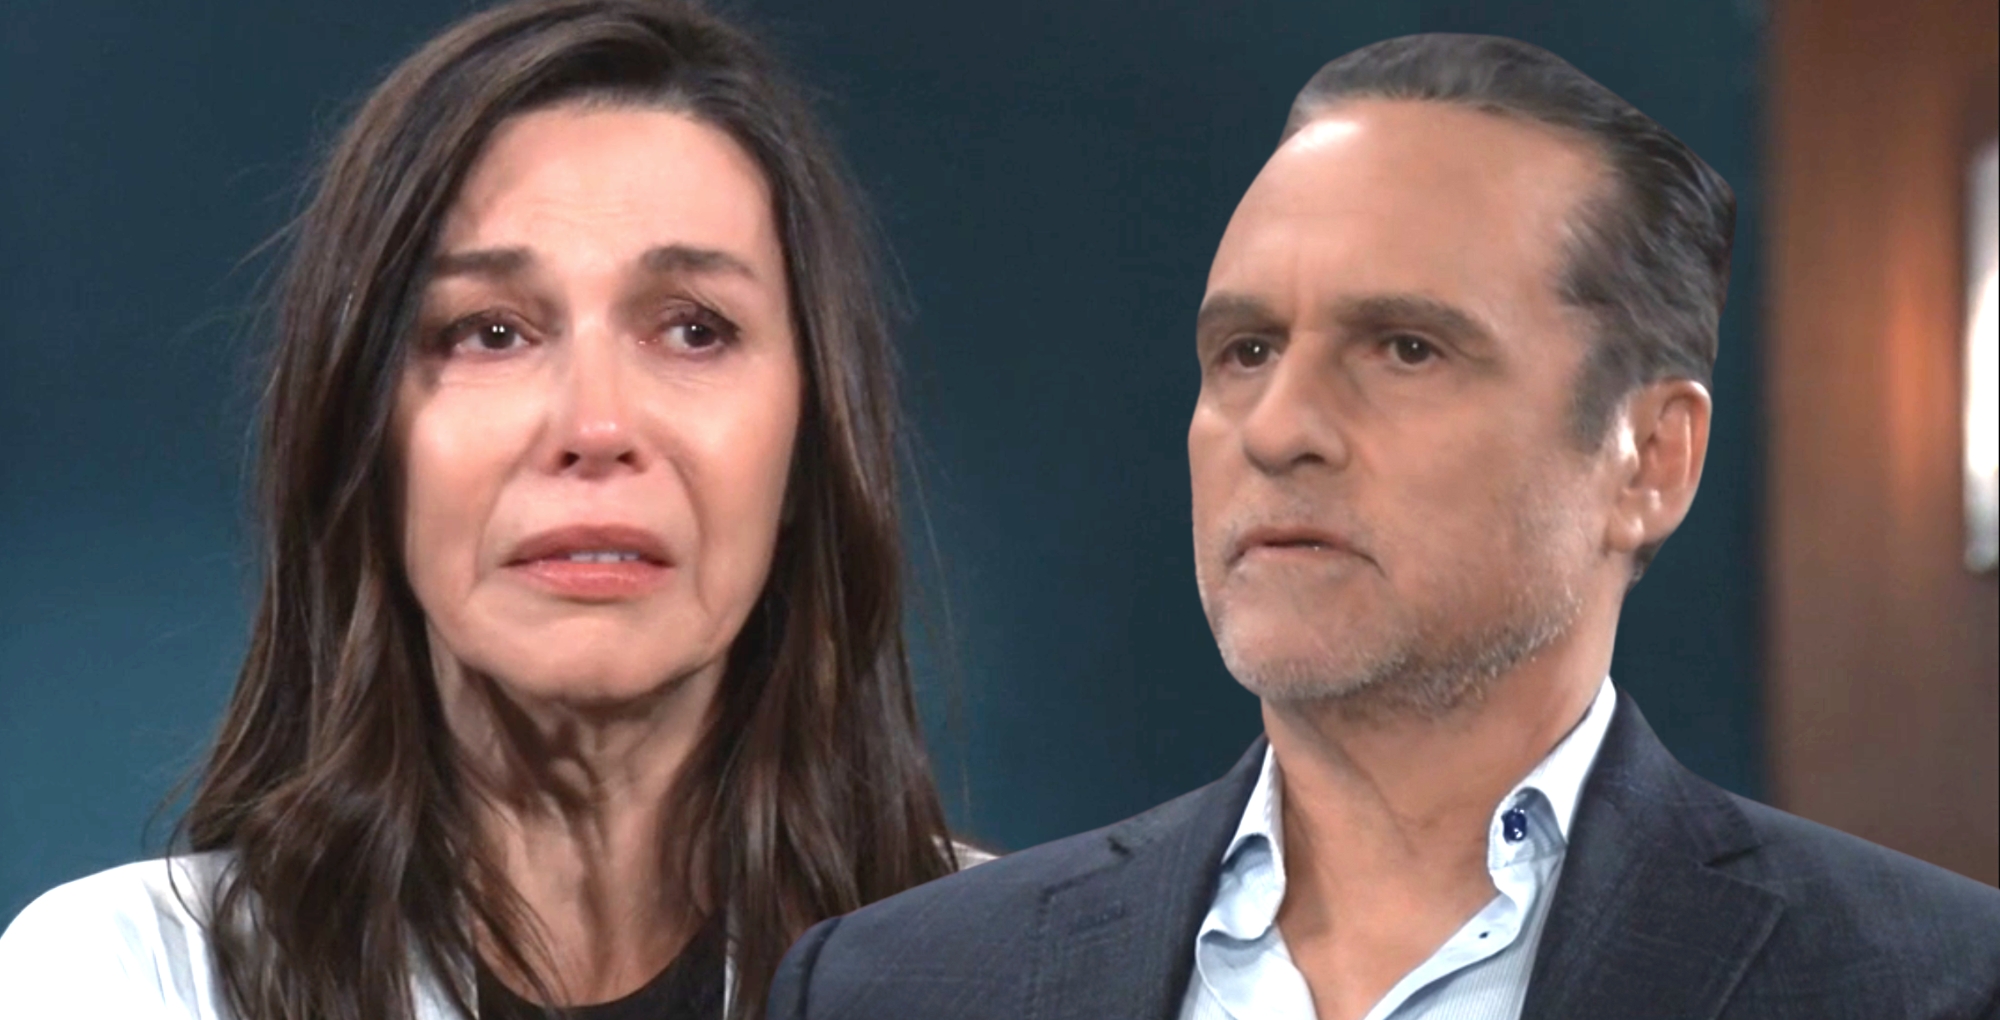 general hospital anna devane and sonny corinthos looking upset.